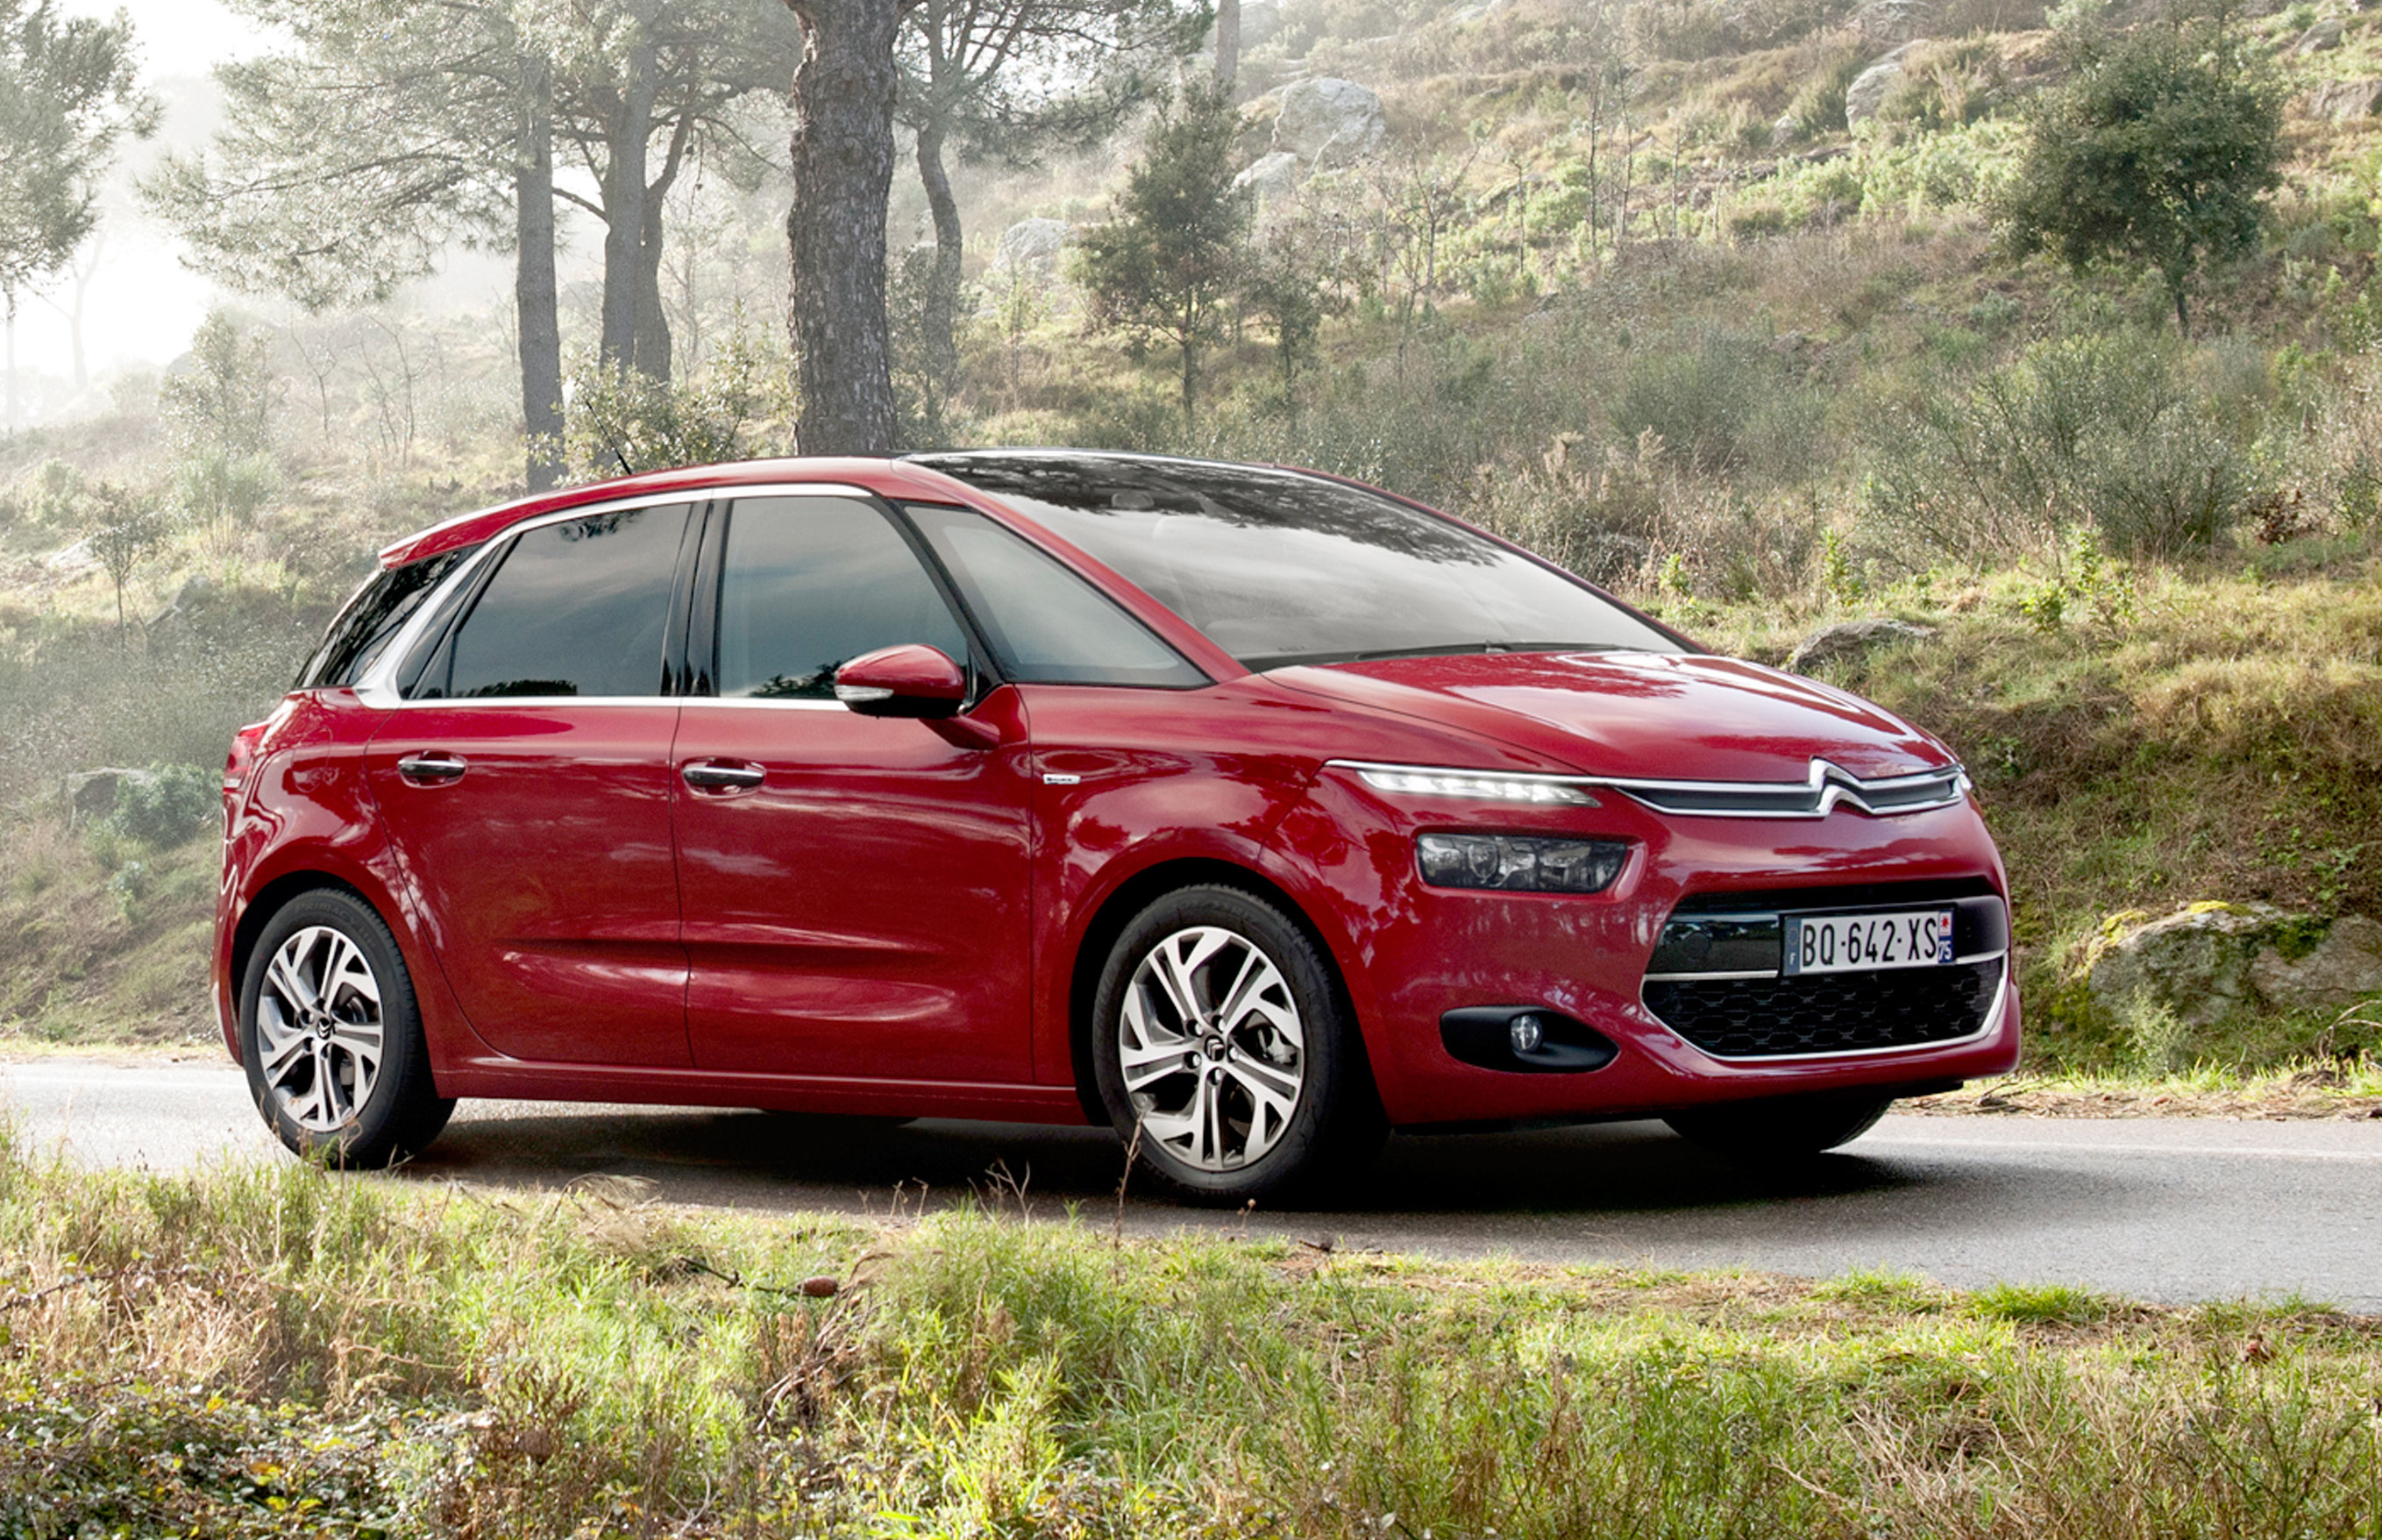 Sleeping in the car Citroen C4 Picasso